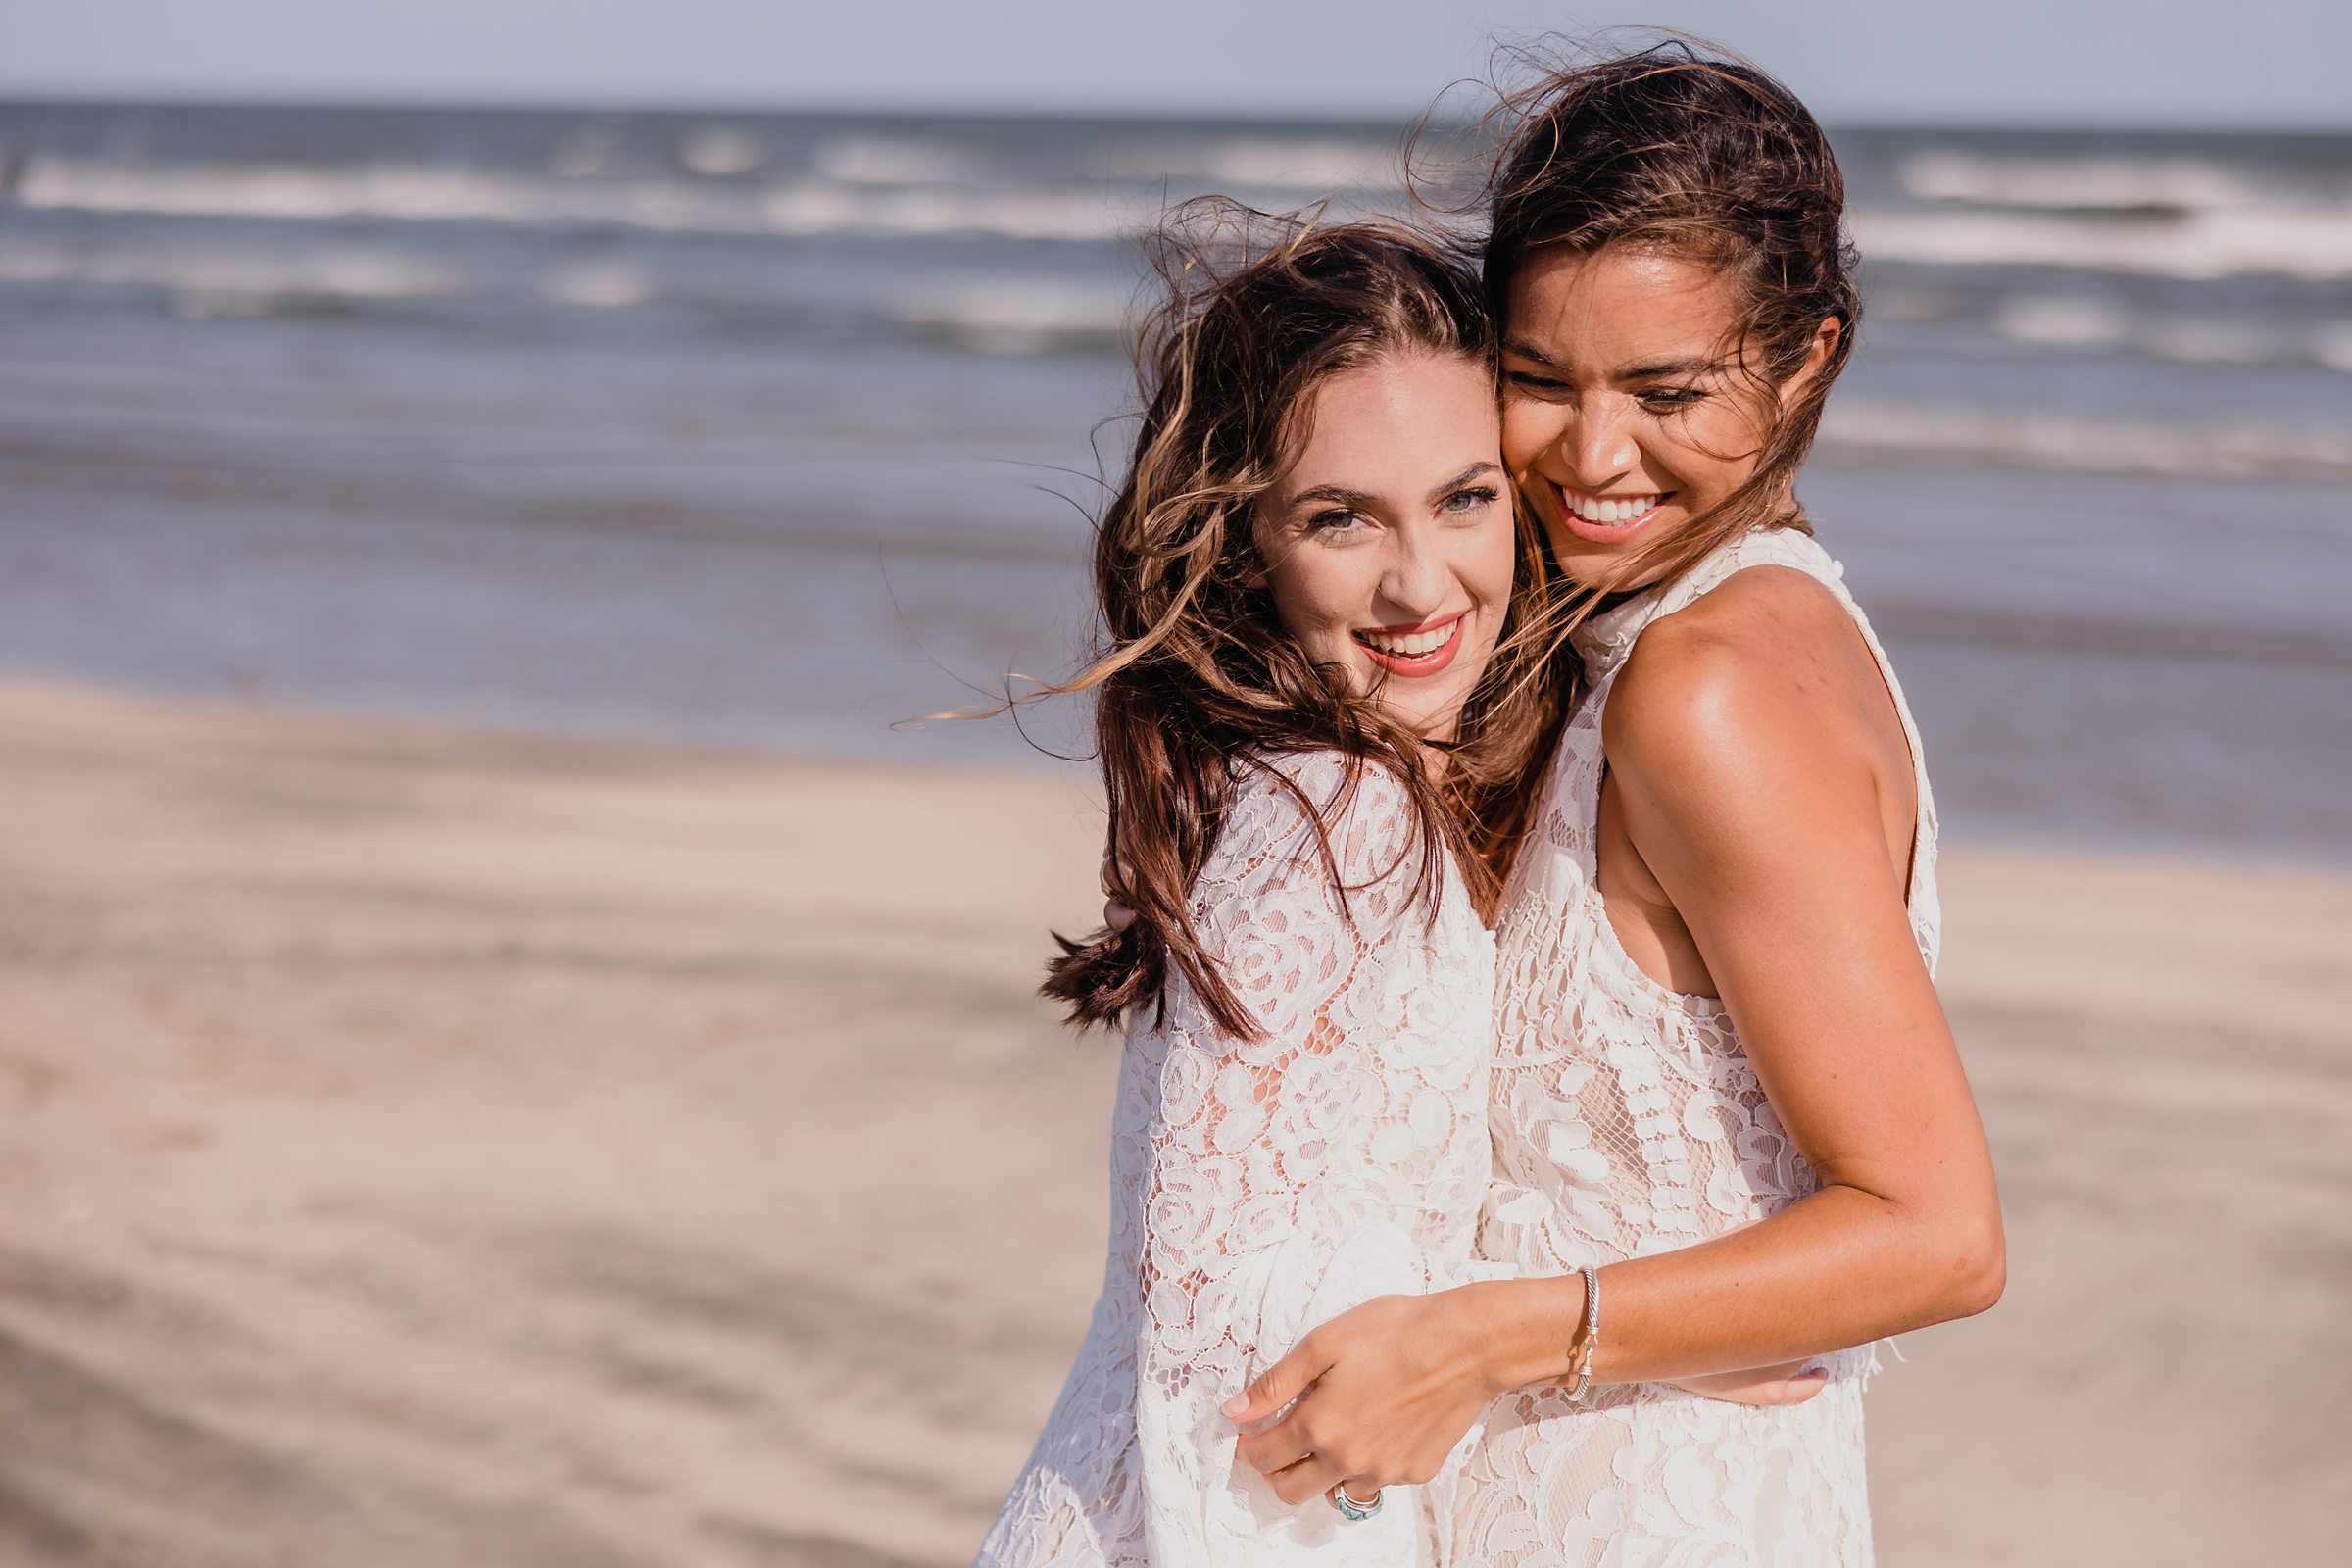 Brides laugh together during an elopement at Galveston Beach in Texas.